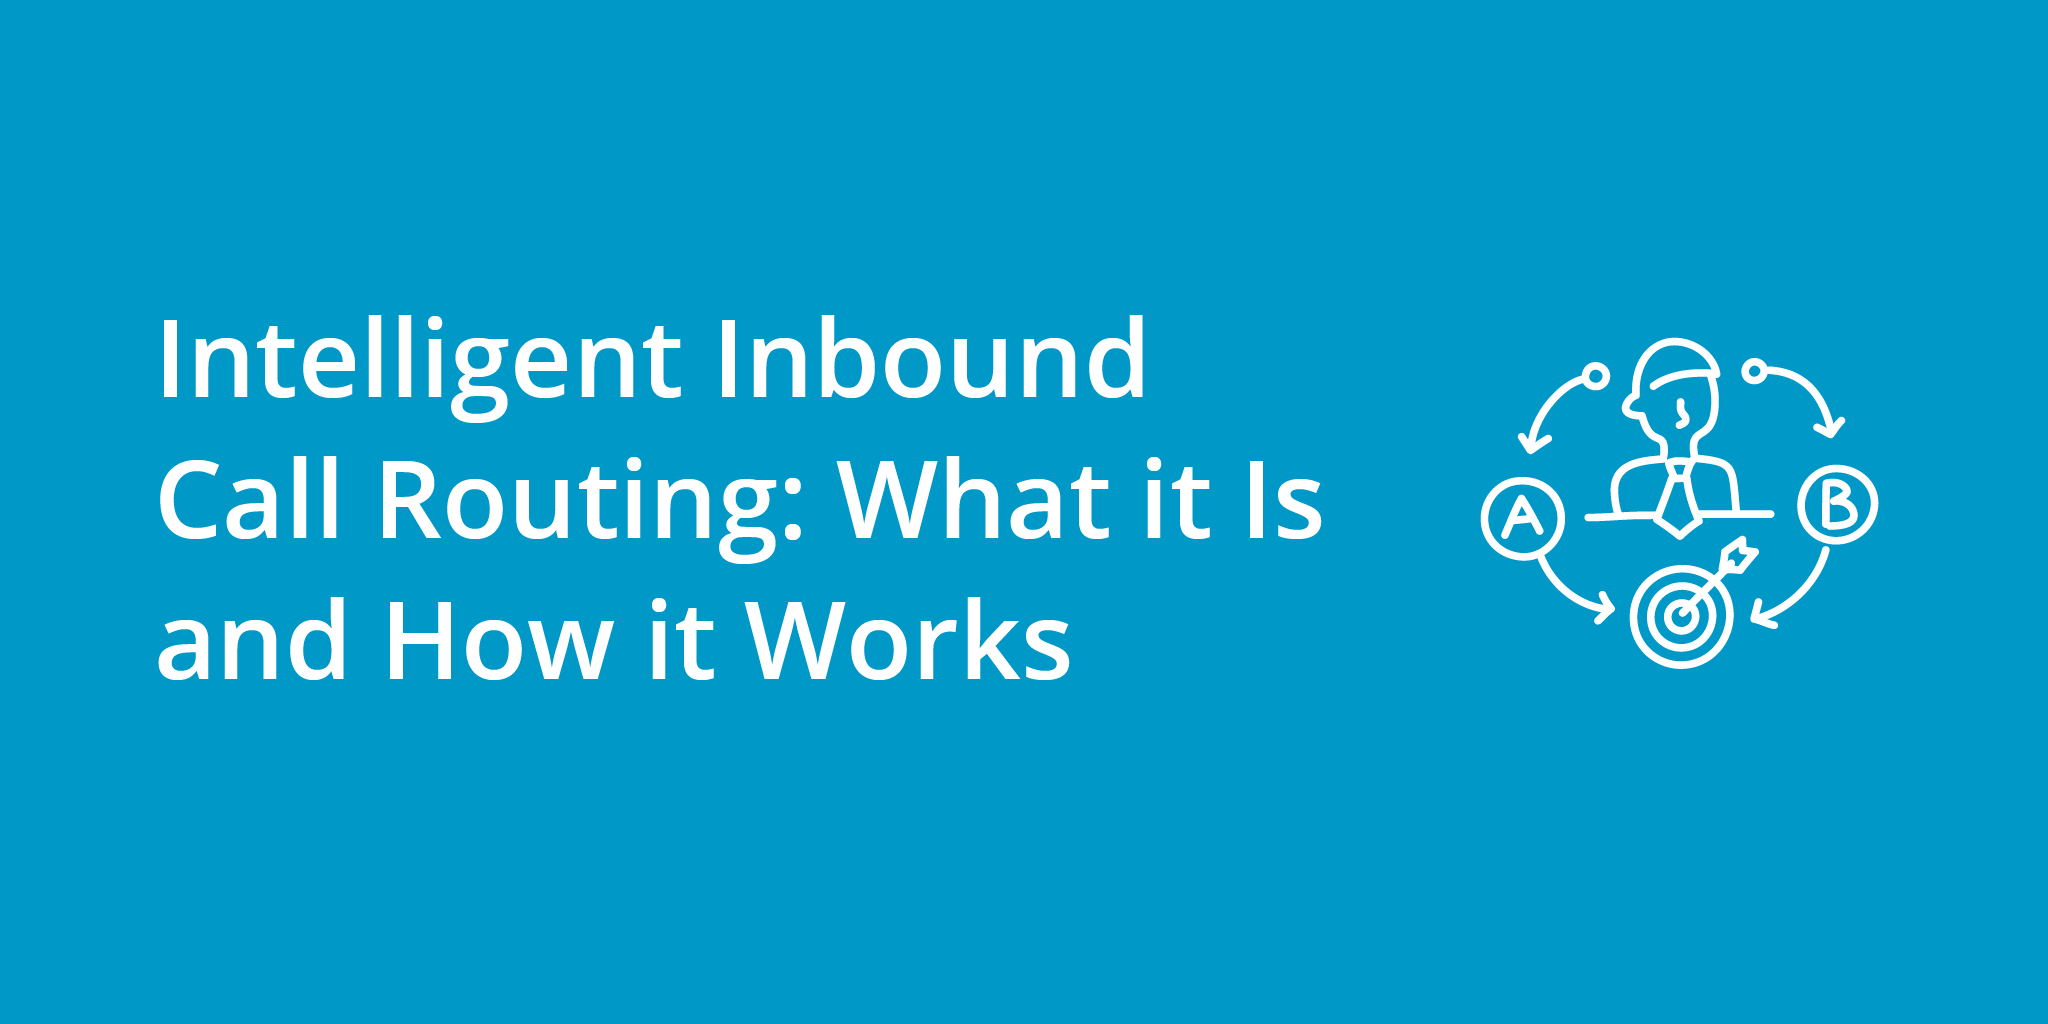 Intelligent Inbound Call Routing: What it Is and How it Works